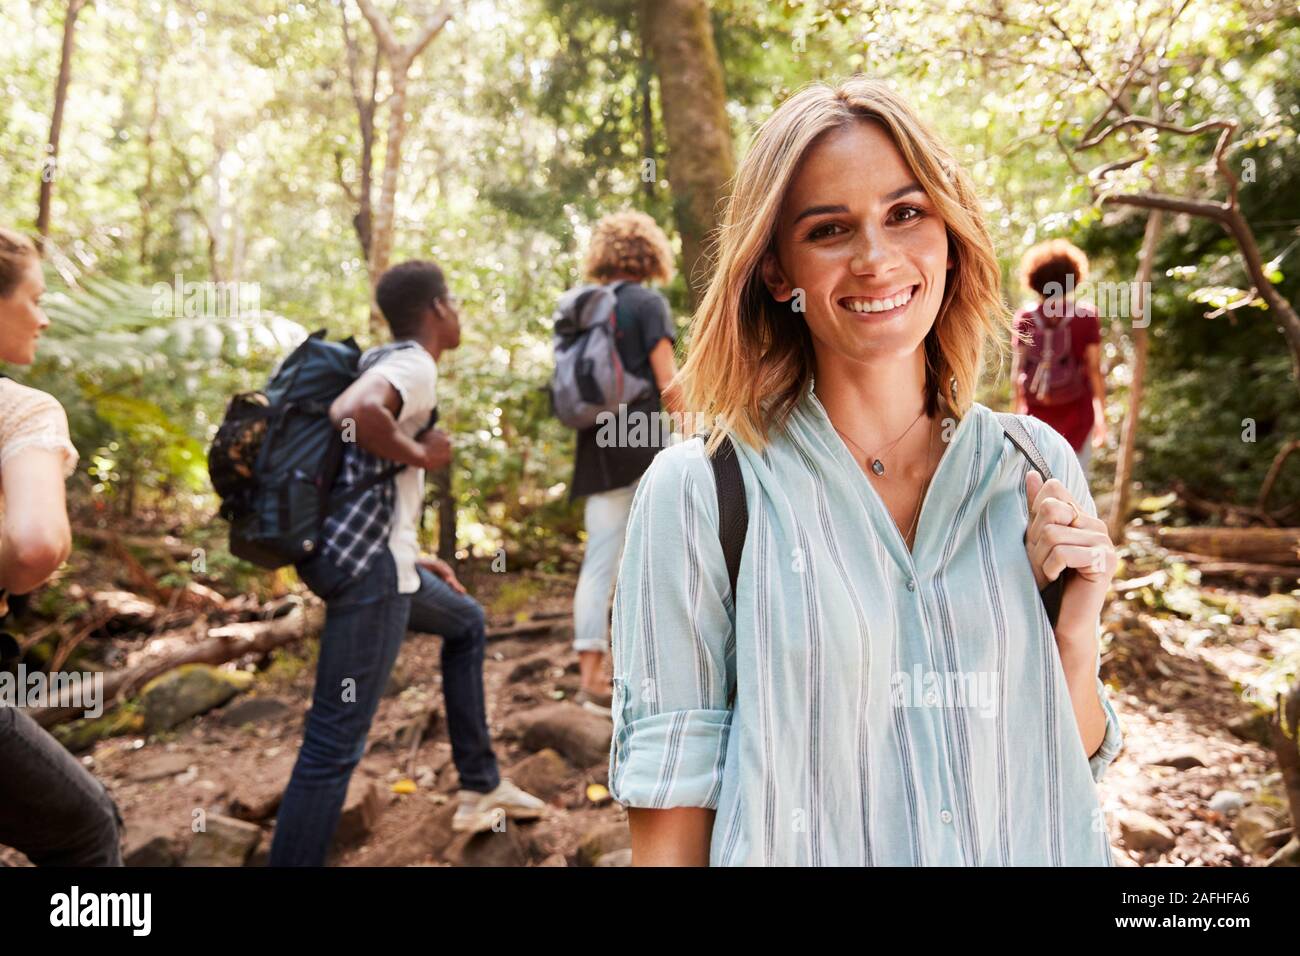 Waist up portrait of smiling millennial white woman hiking in a forest with her friends, close up Stock Photo